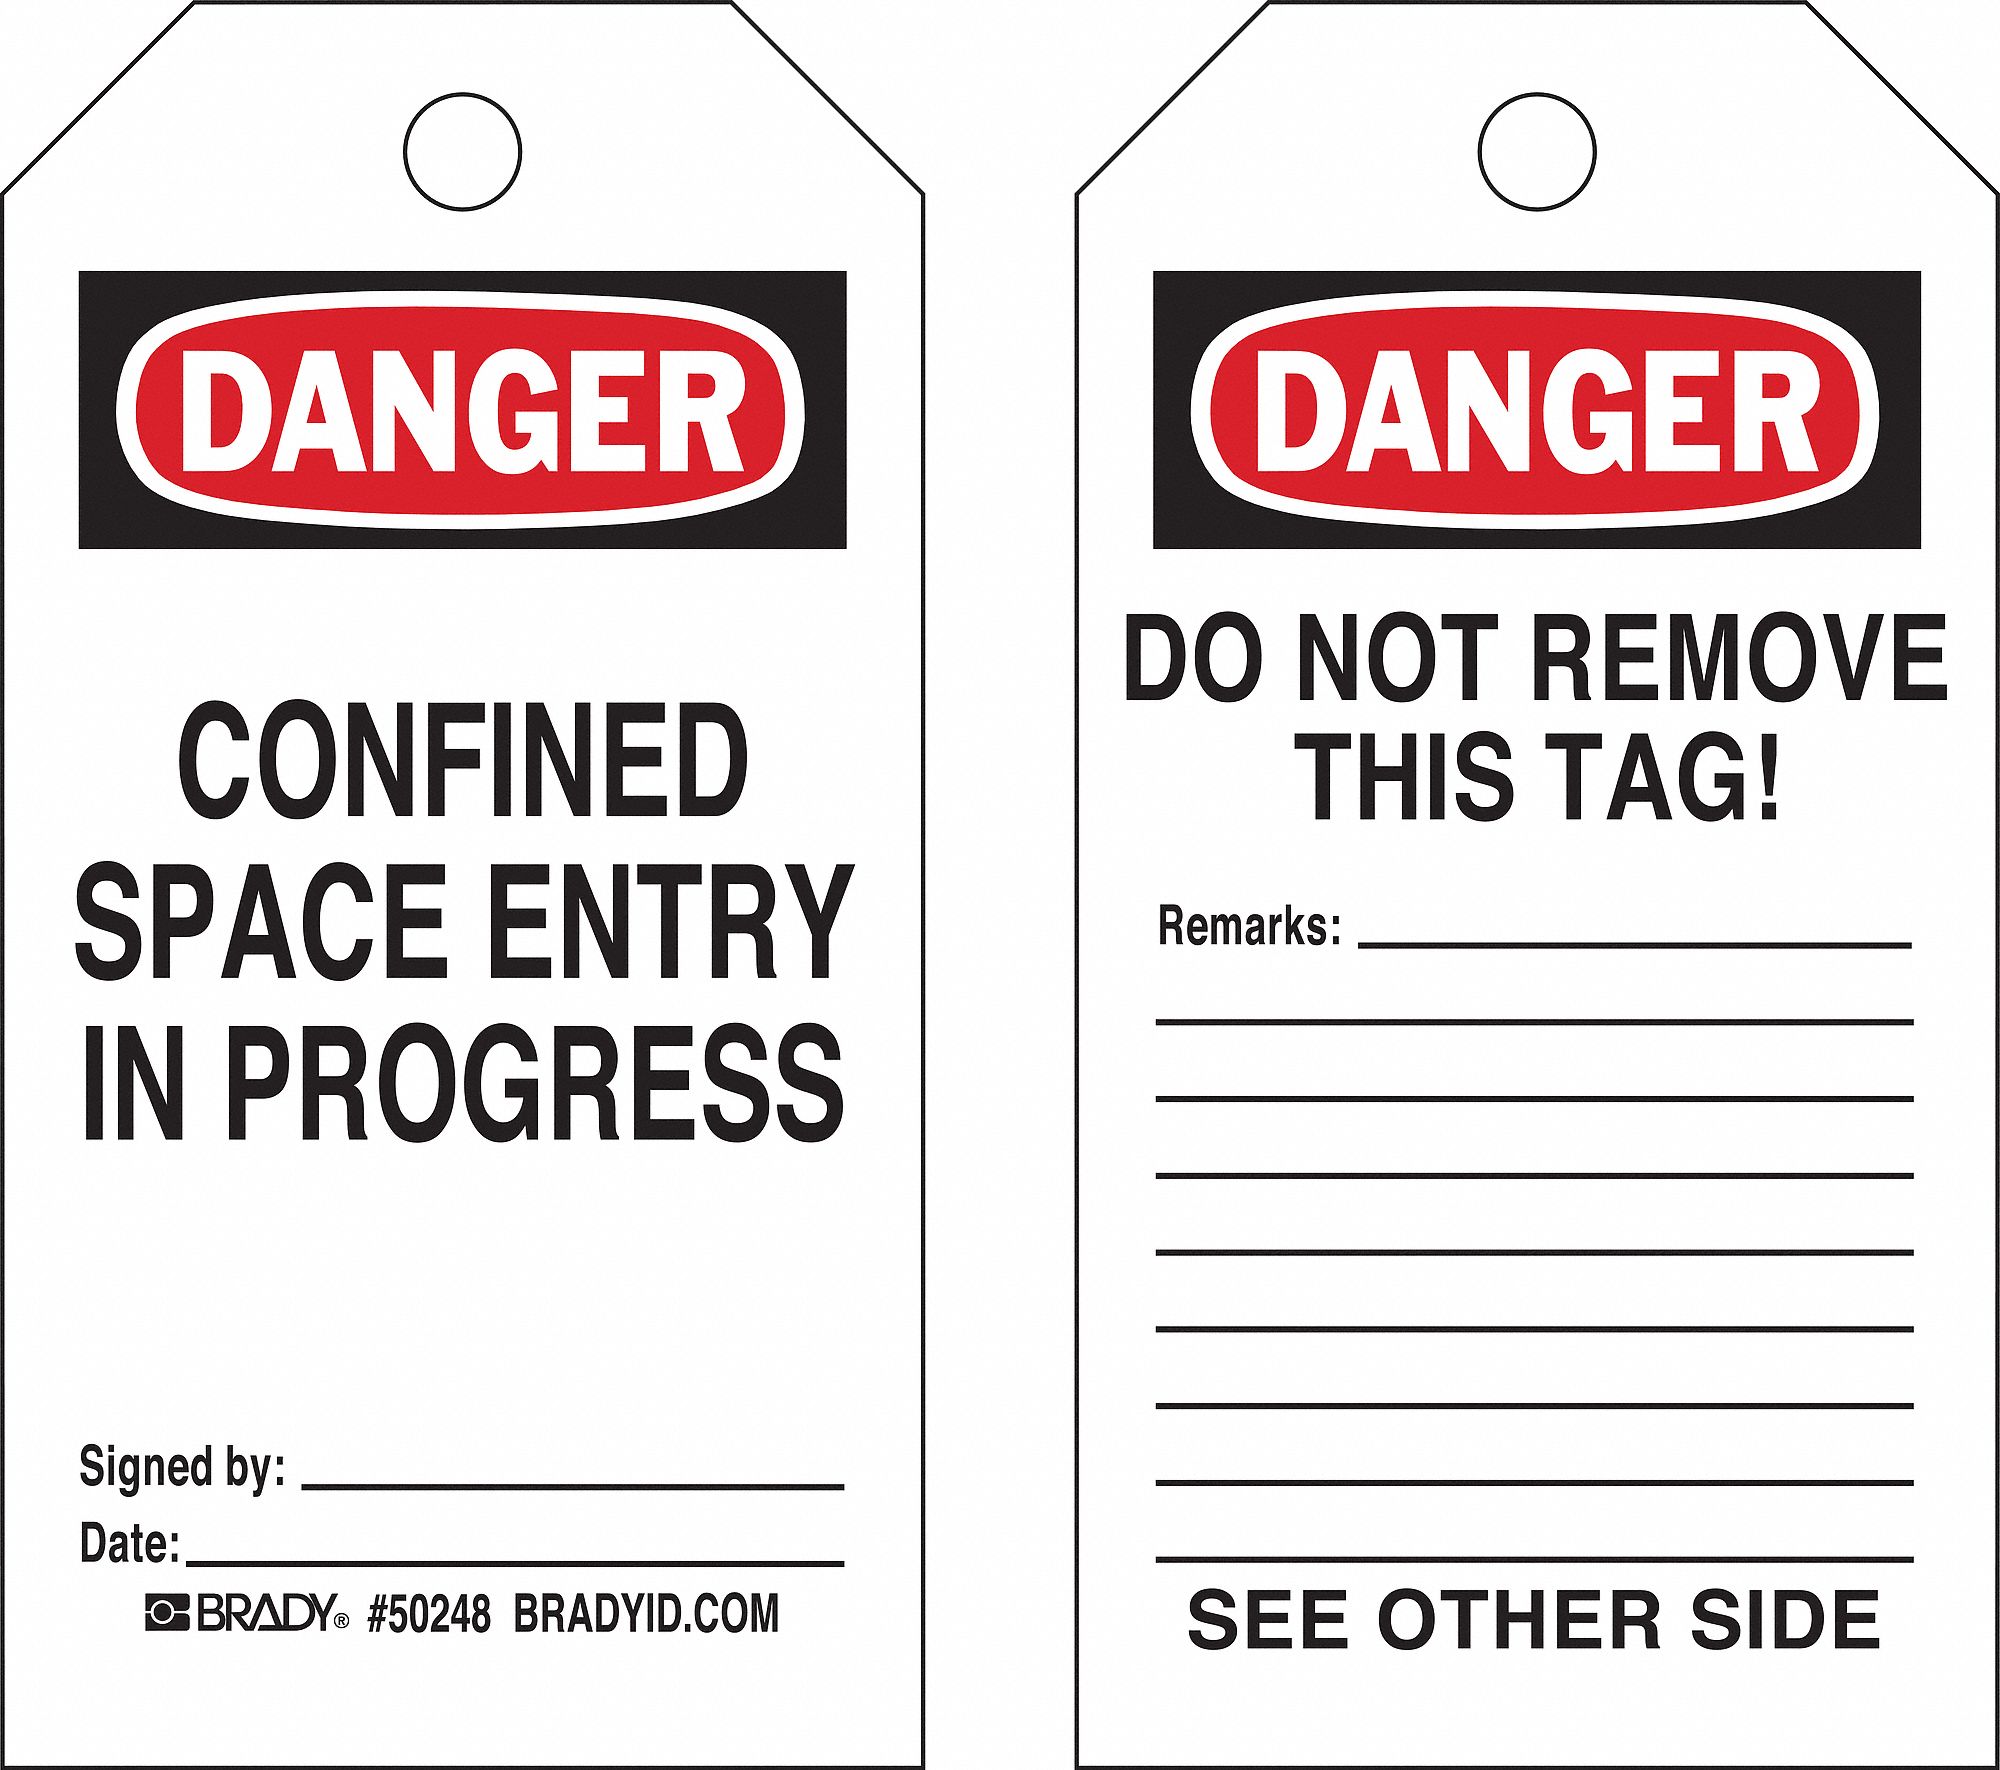 Economy PolyesterConfined Space Entry In Progress/Signed By/Date, Danger Tag 5-3/4